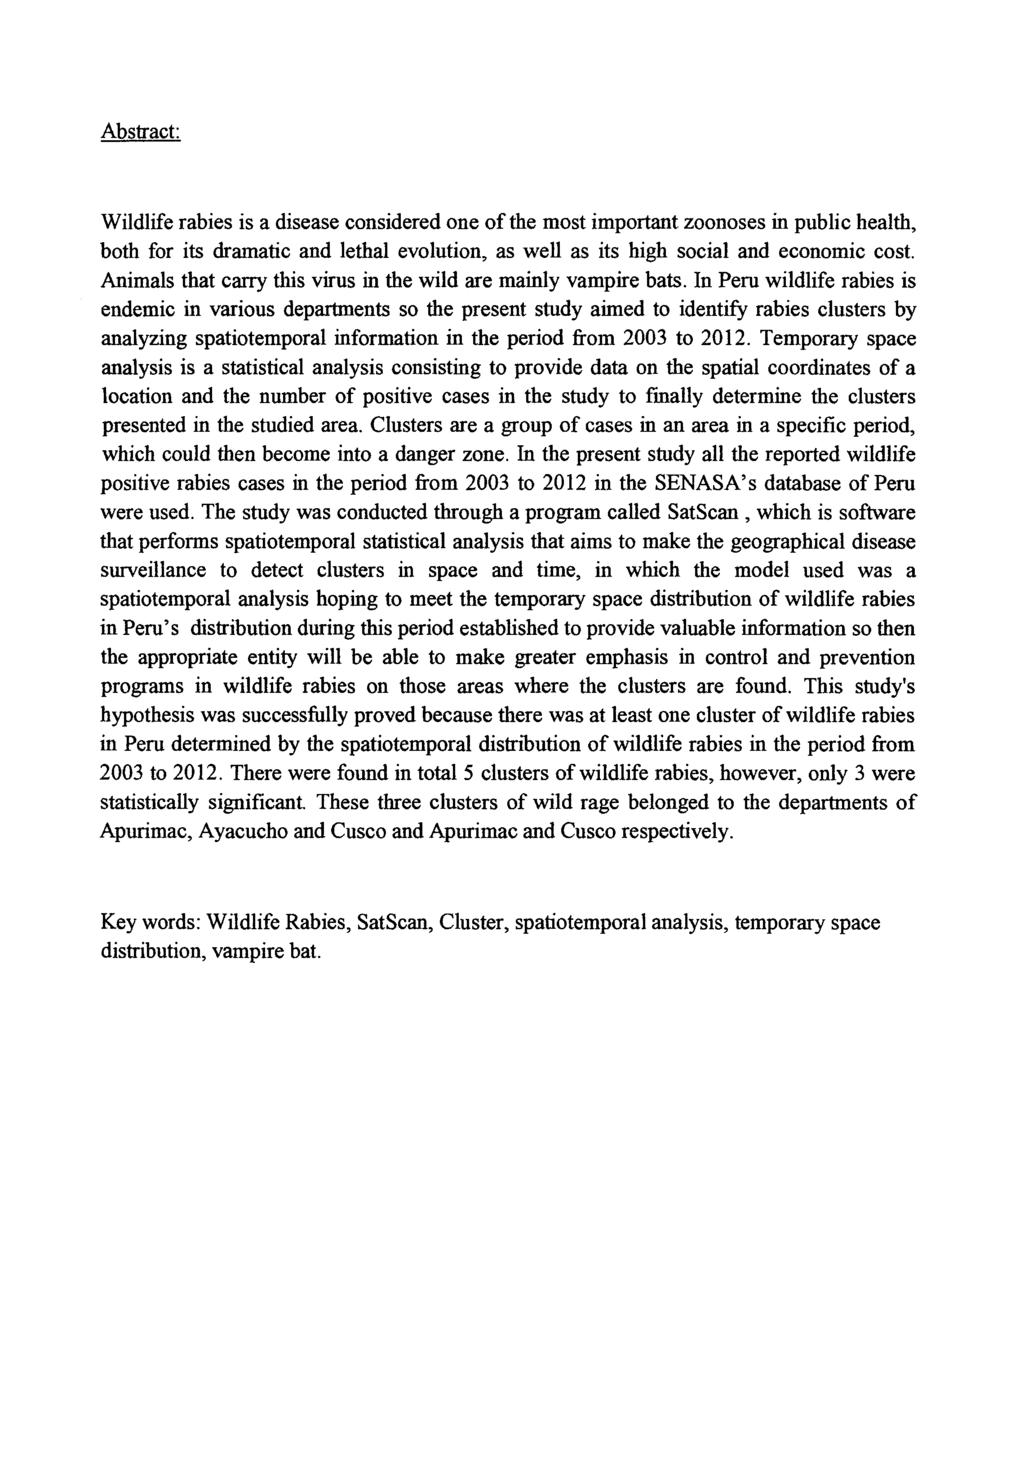 Abstract: Wildlife rabies is a disease considered one of the most important zoonoses in public health, both for its dramatic and lethal evolution, as well as its high social and economic cost.